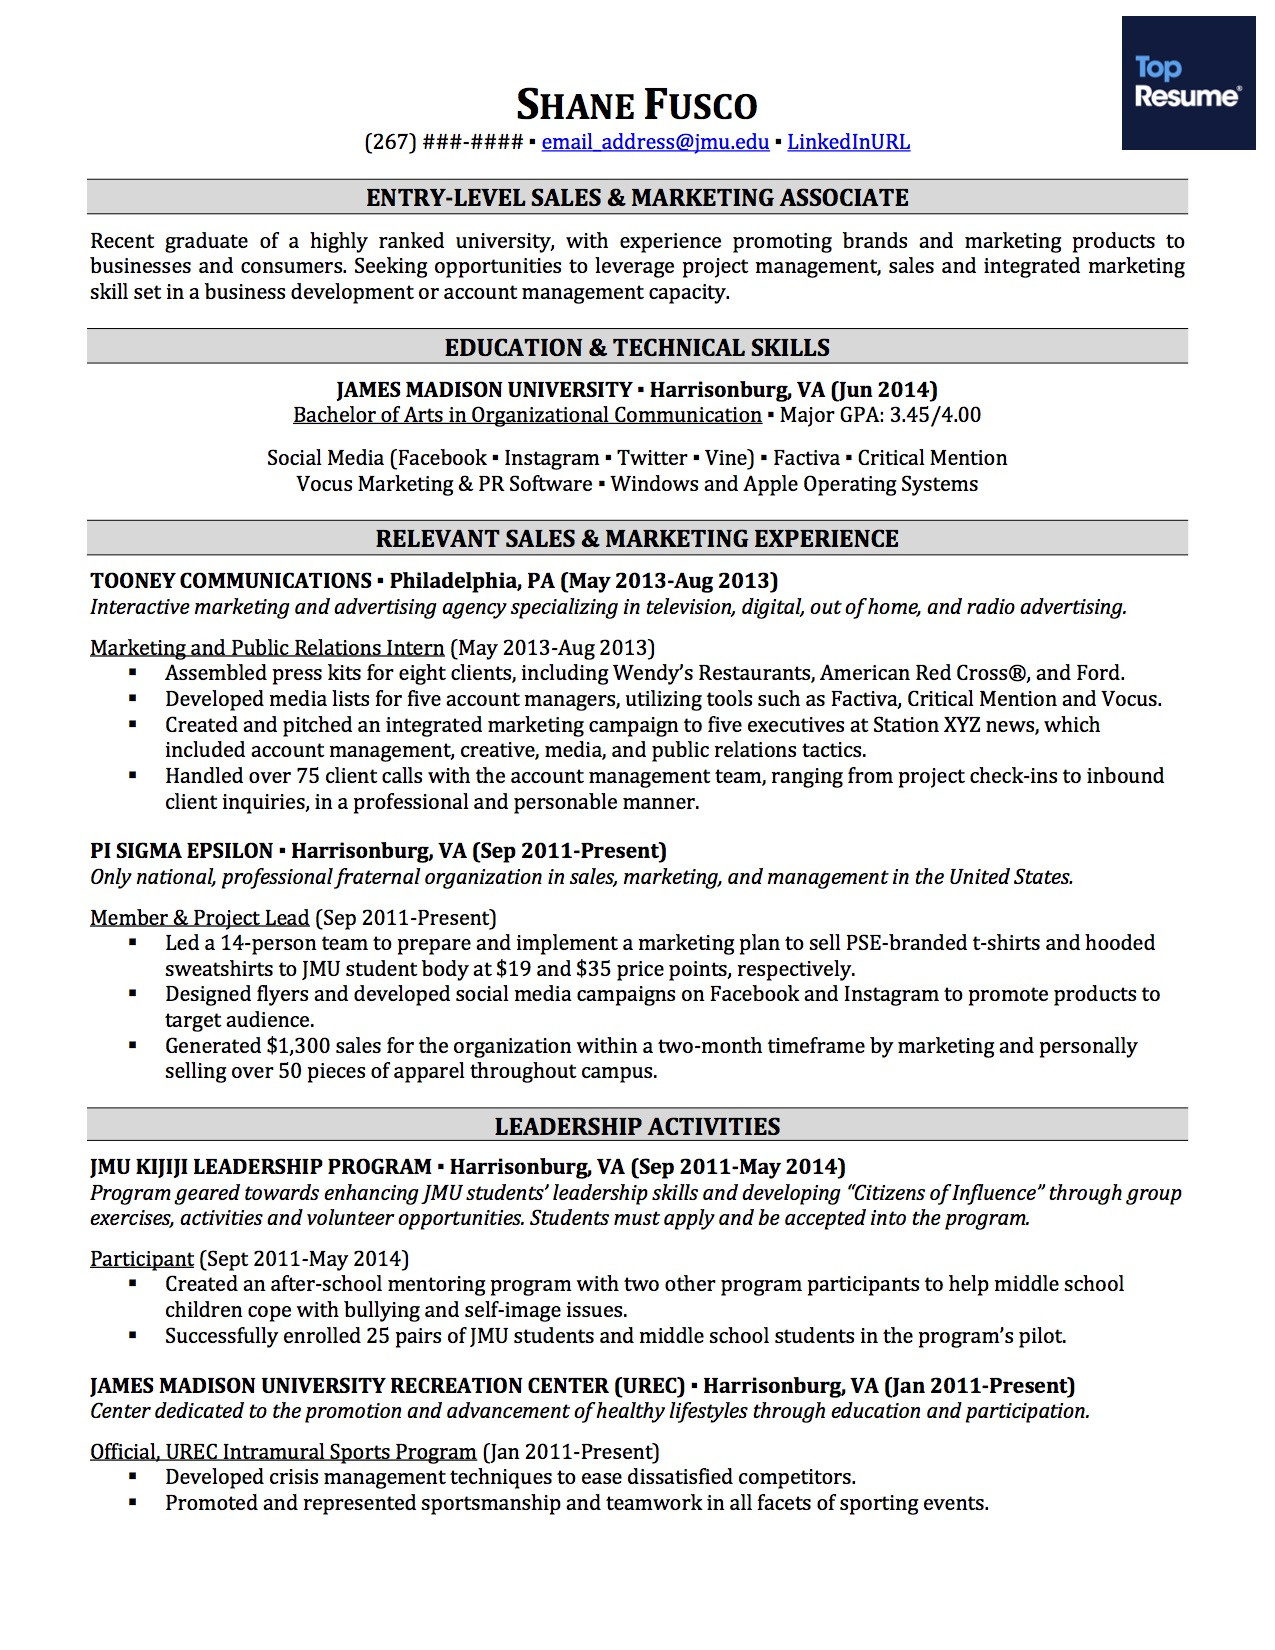 Sample Resume for Teenager who Has Never Worked How to Write A Resume with No Experience topresume